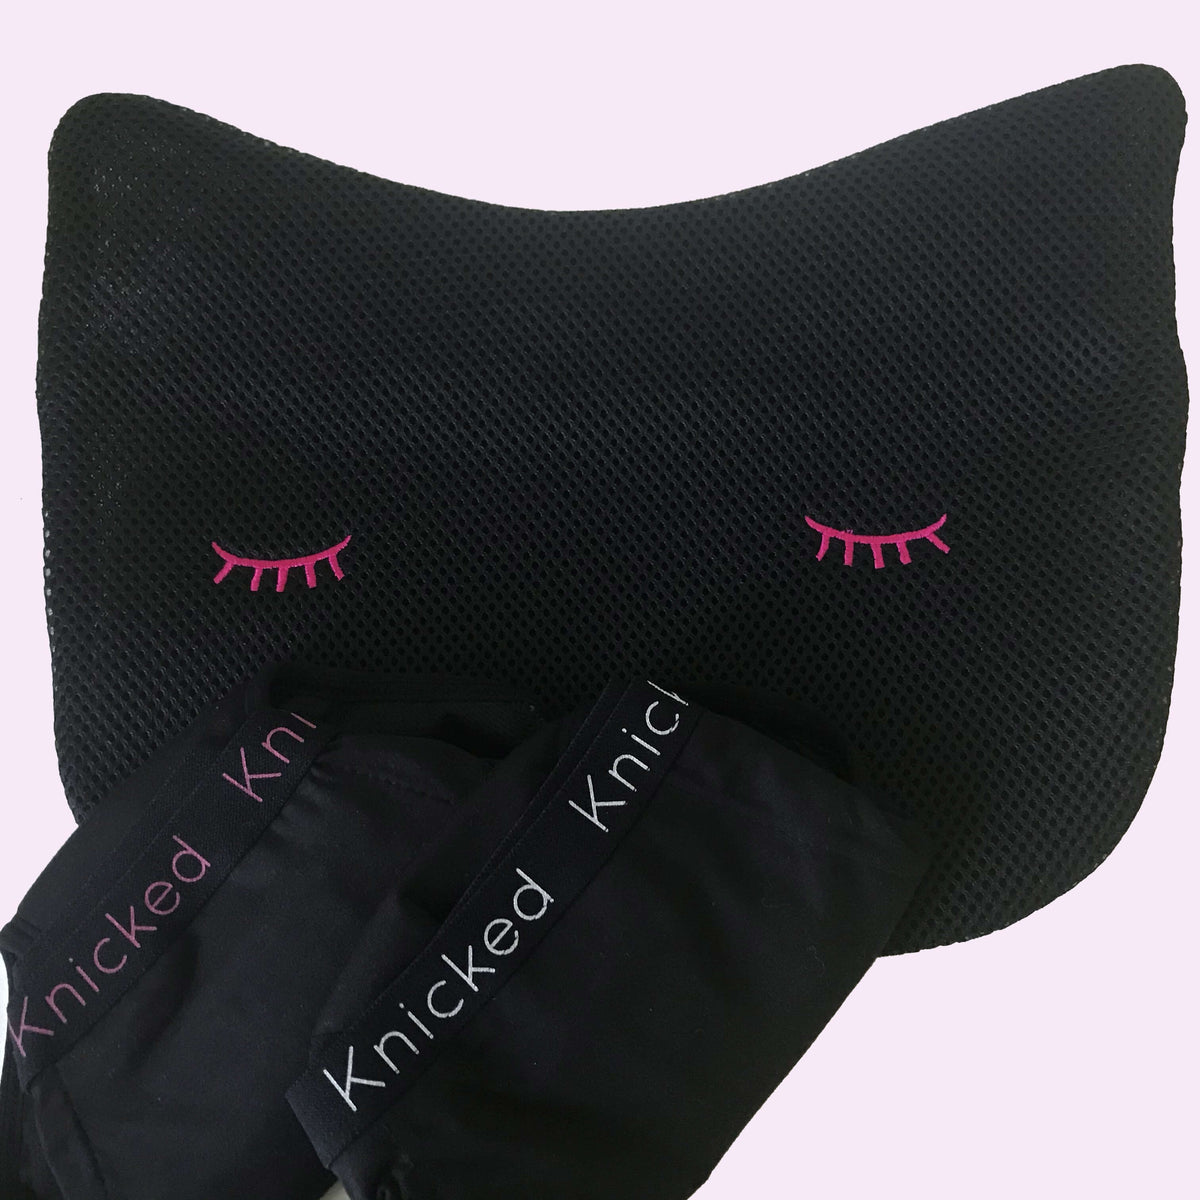 Knicked undergarment wash bag, holds up to 5 pairs of undies.